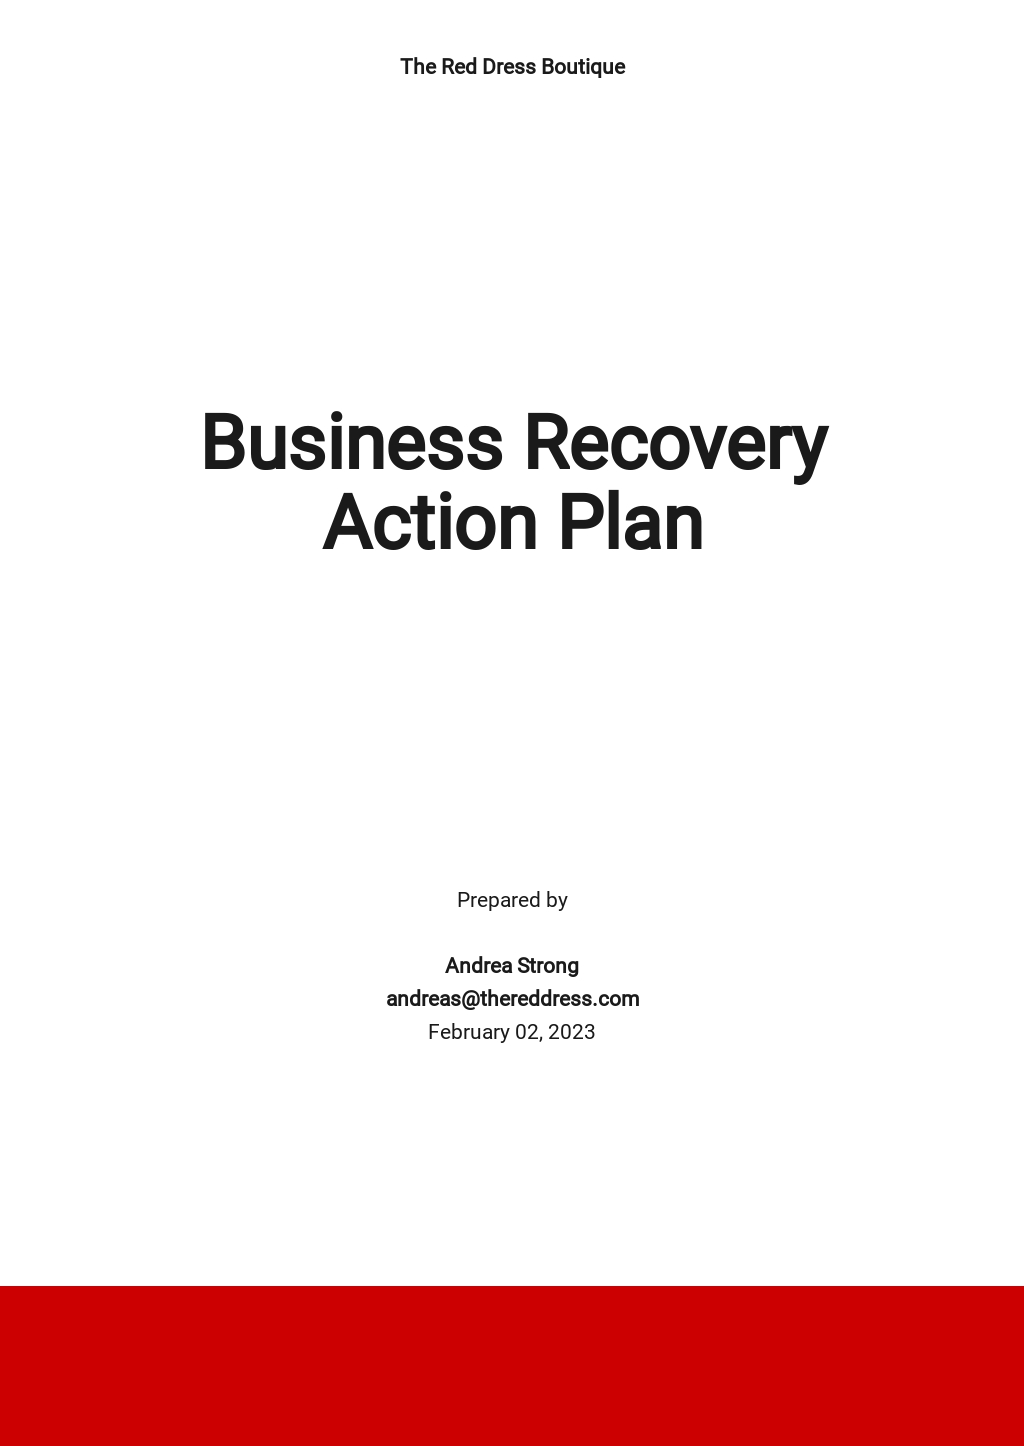 Business Recovery Action Plan Template